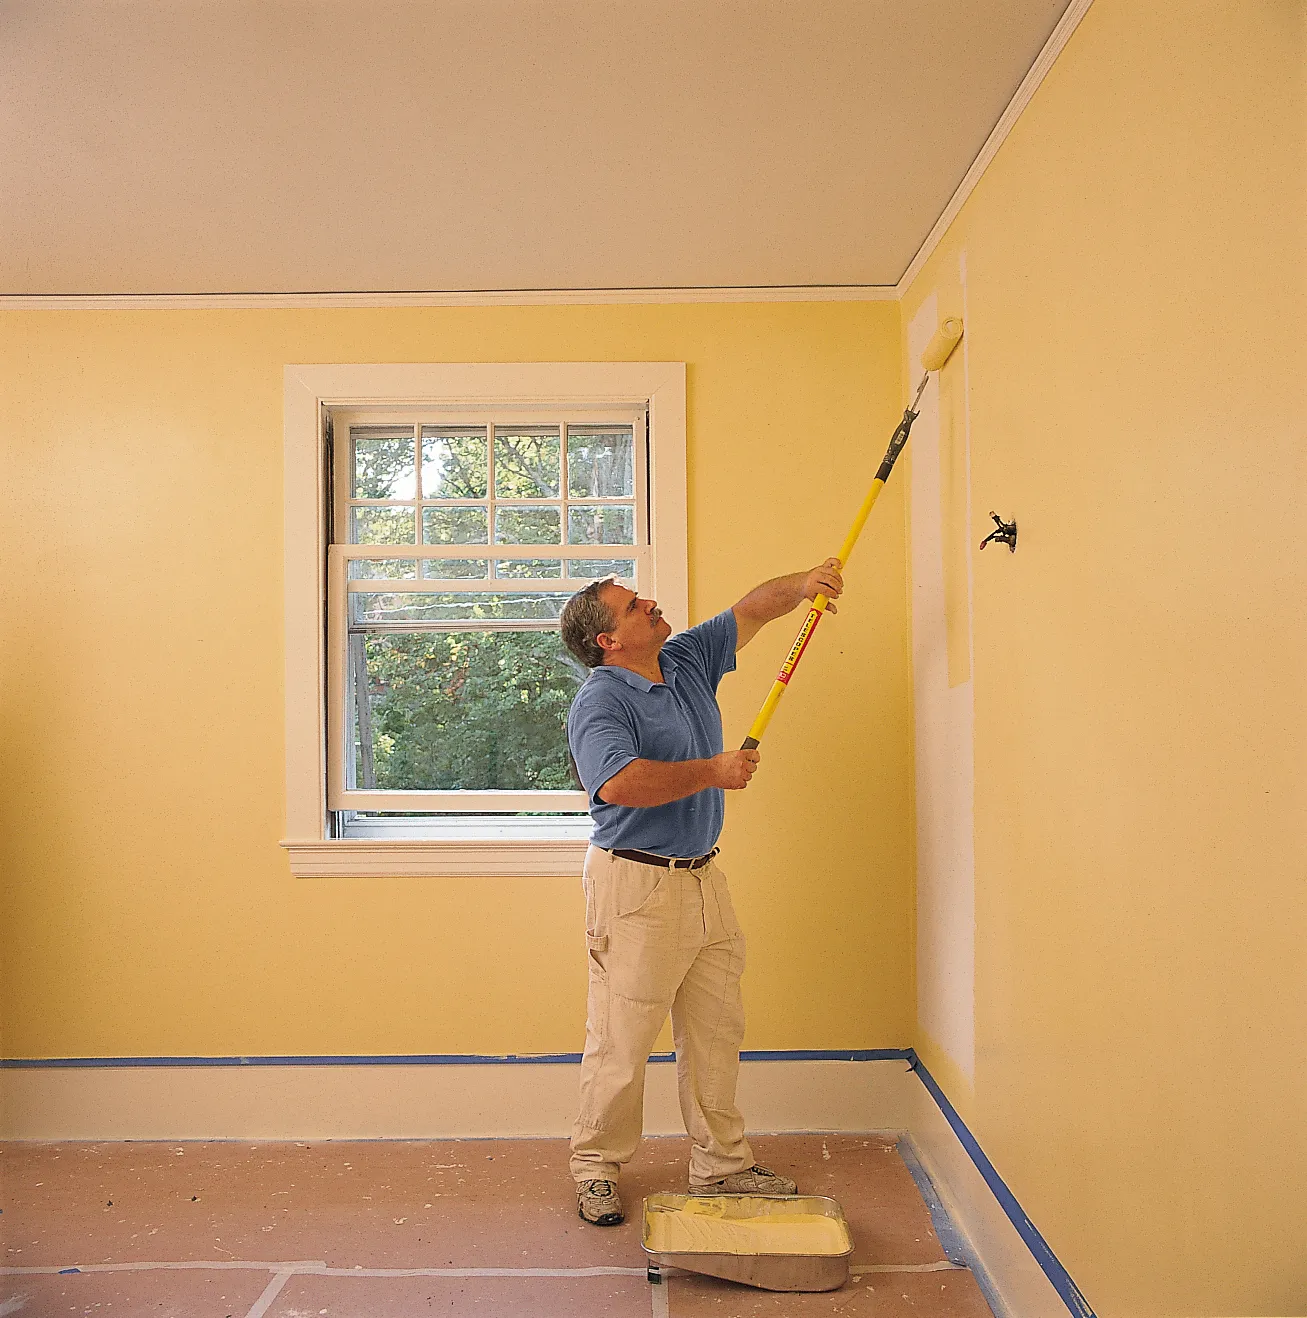 How to Paint Doors, Windows, and Walls